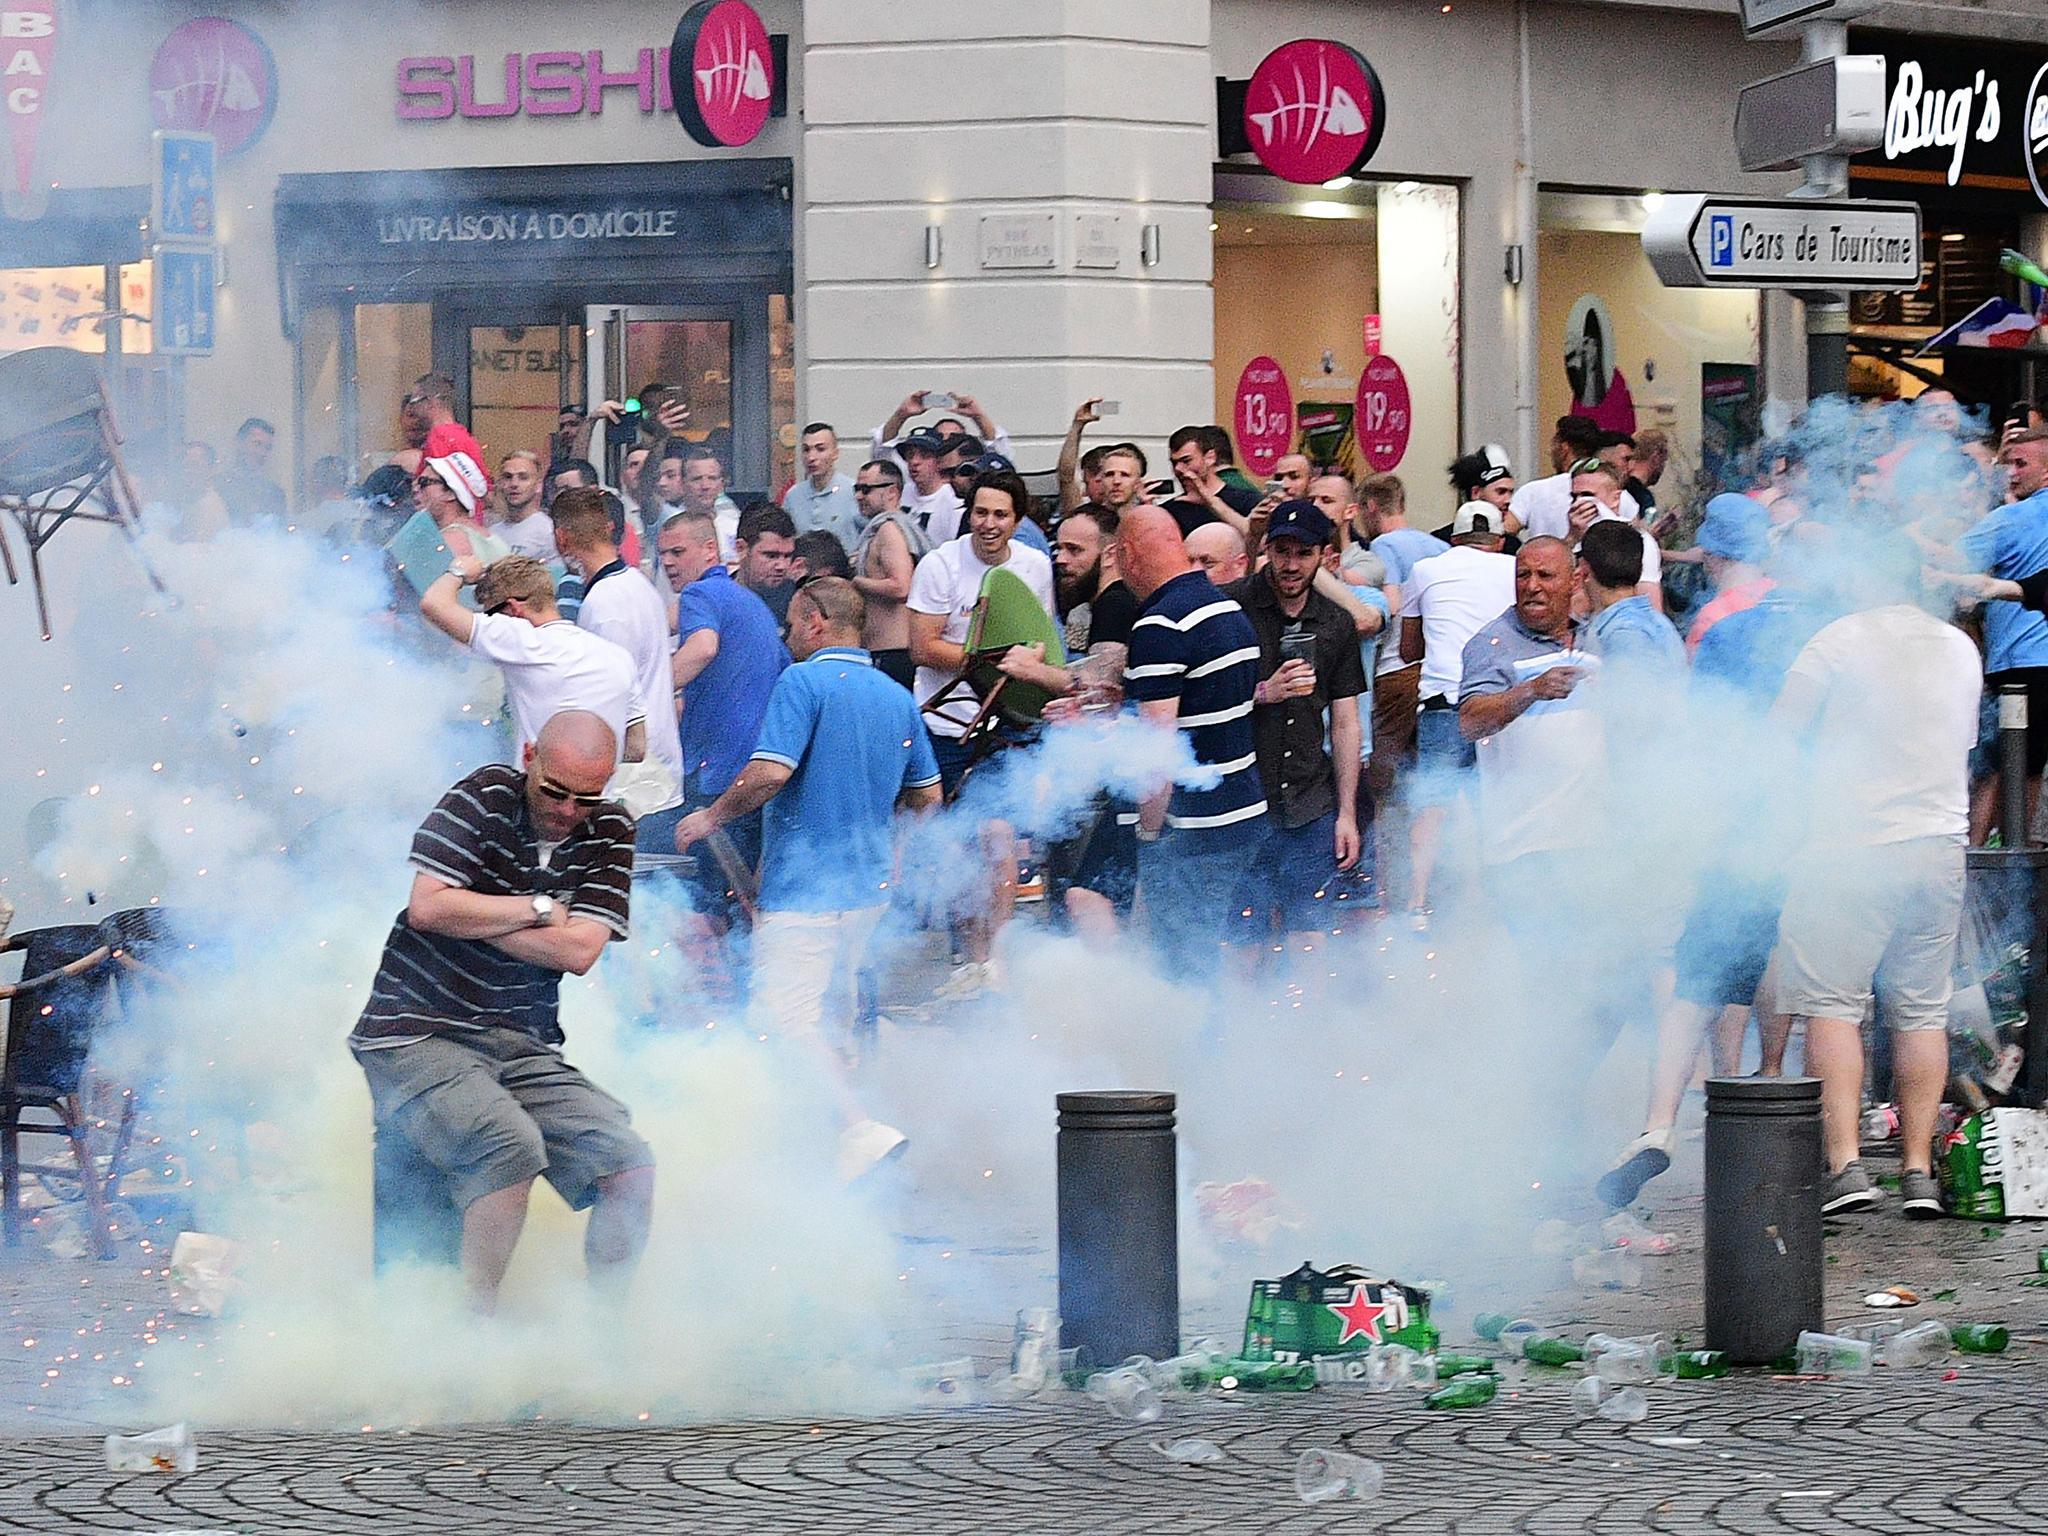 Russian and English fans with both involved in violence in Marseille's old port